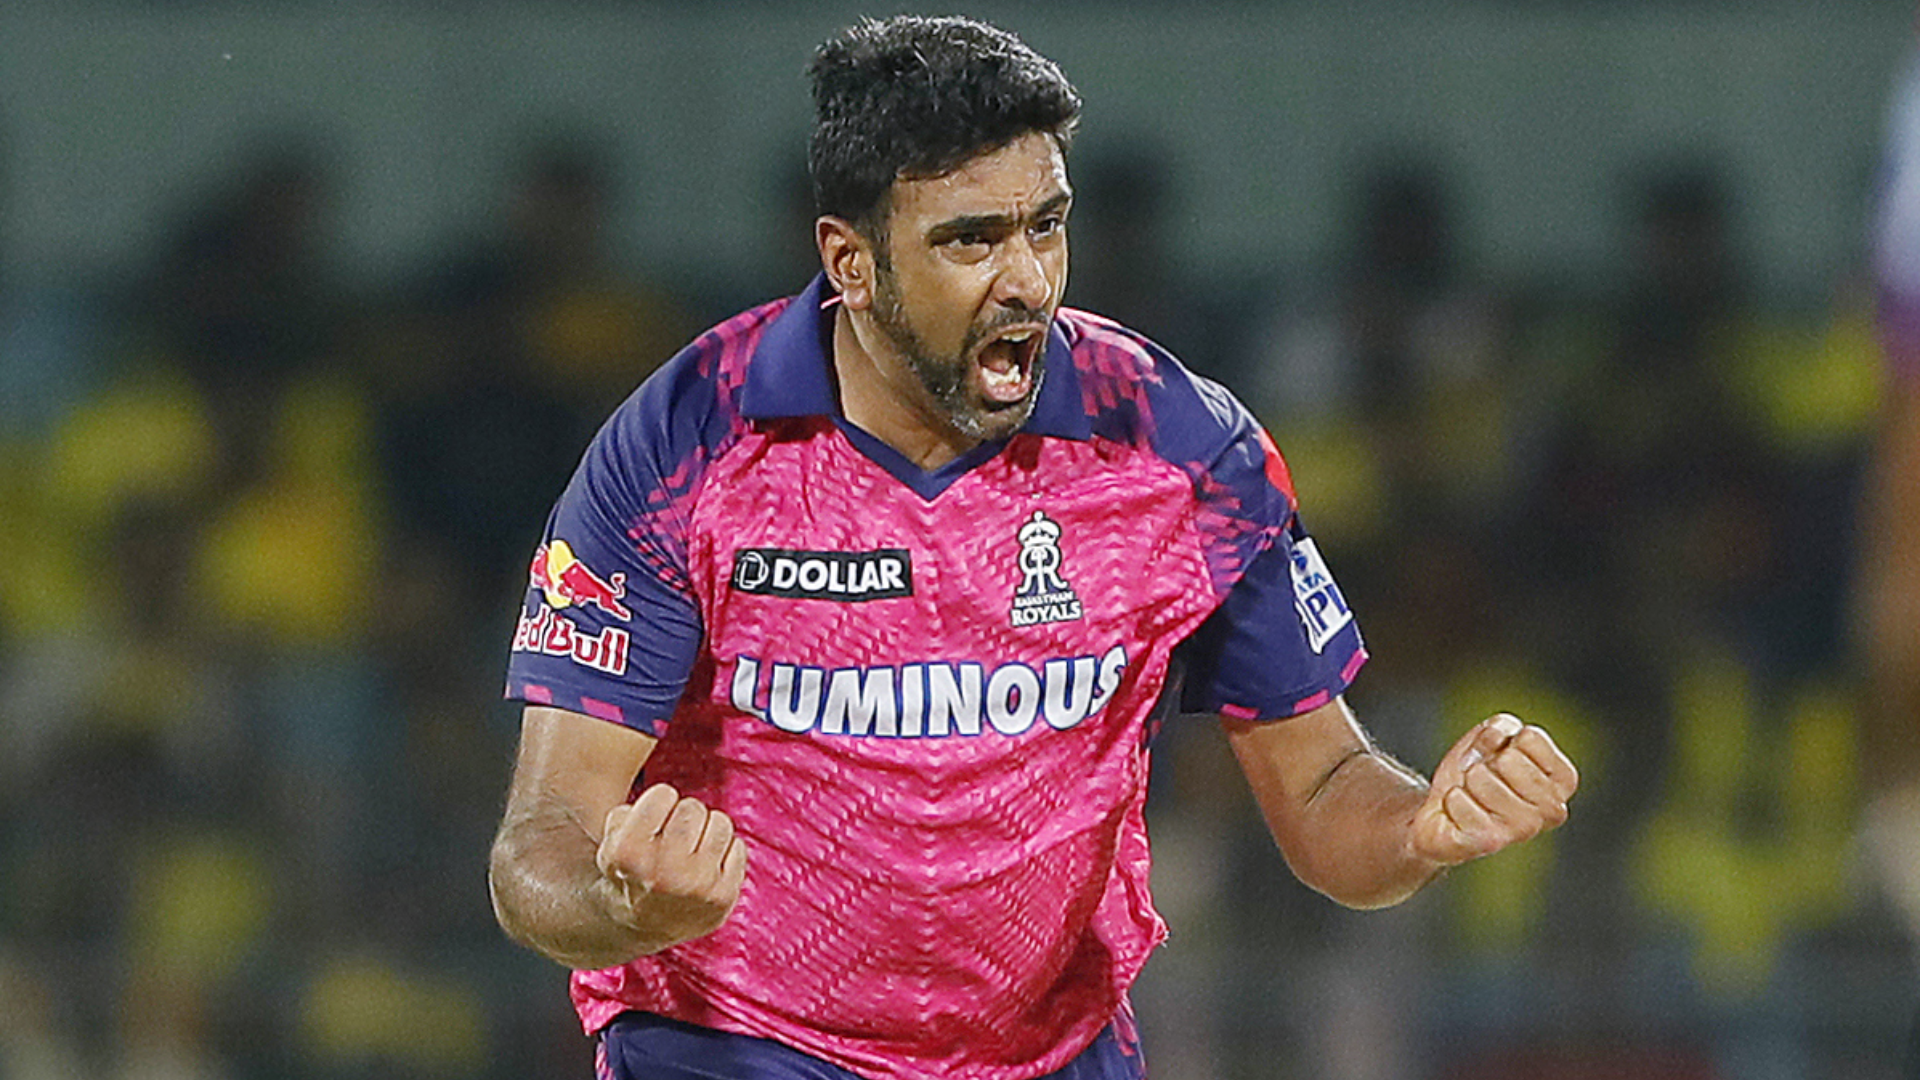 R Ashwin Reveals He Once Got The Footage Of Opposition Players By Befriending Mediapersons